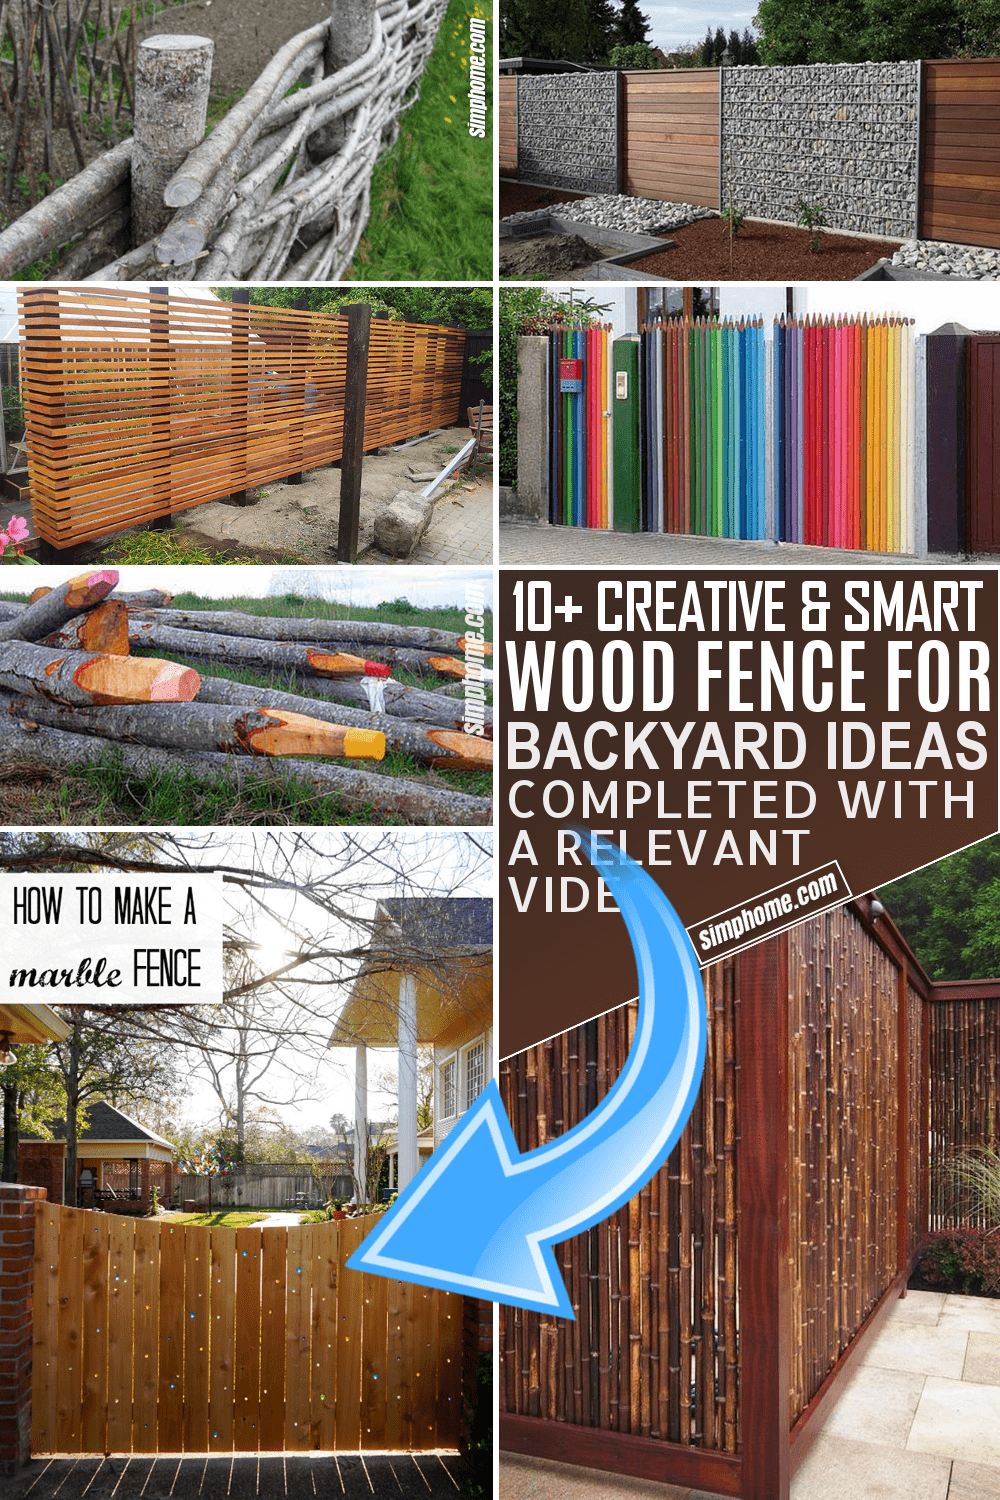 10 Wooden Fence for Backyard Ideas by Simphome.com